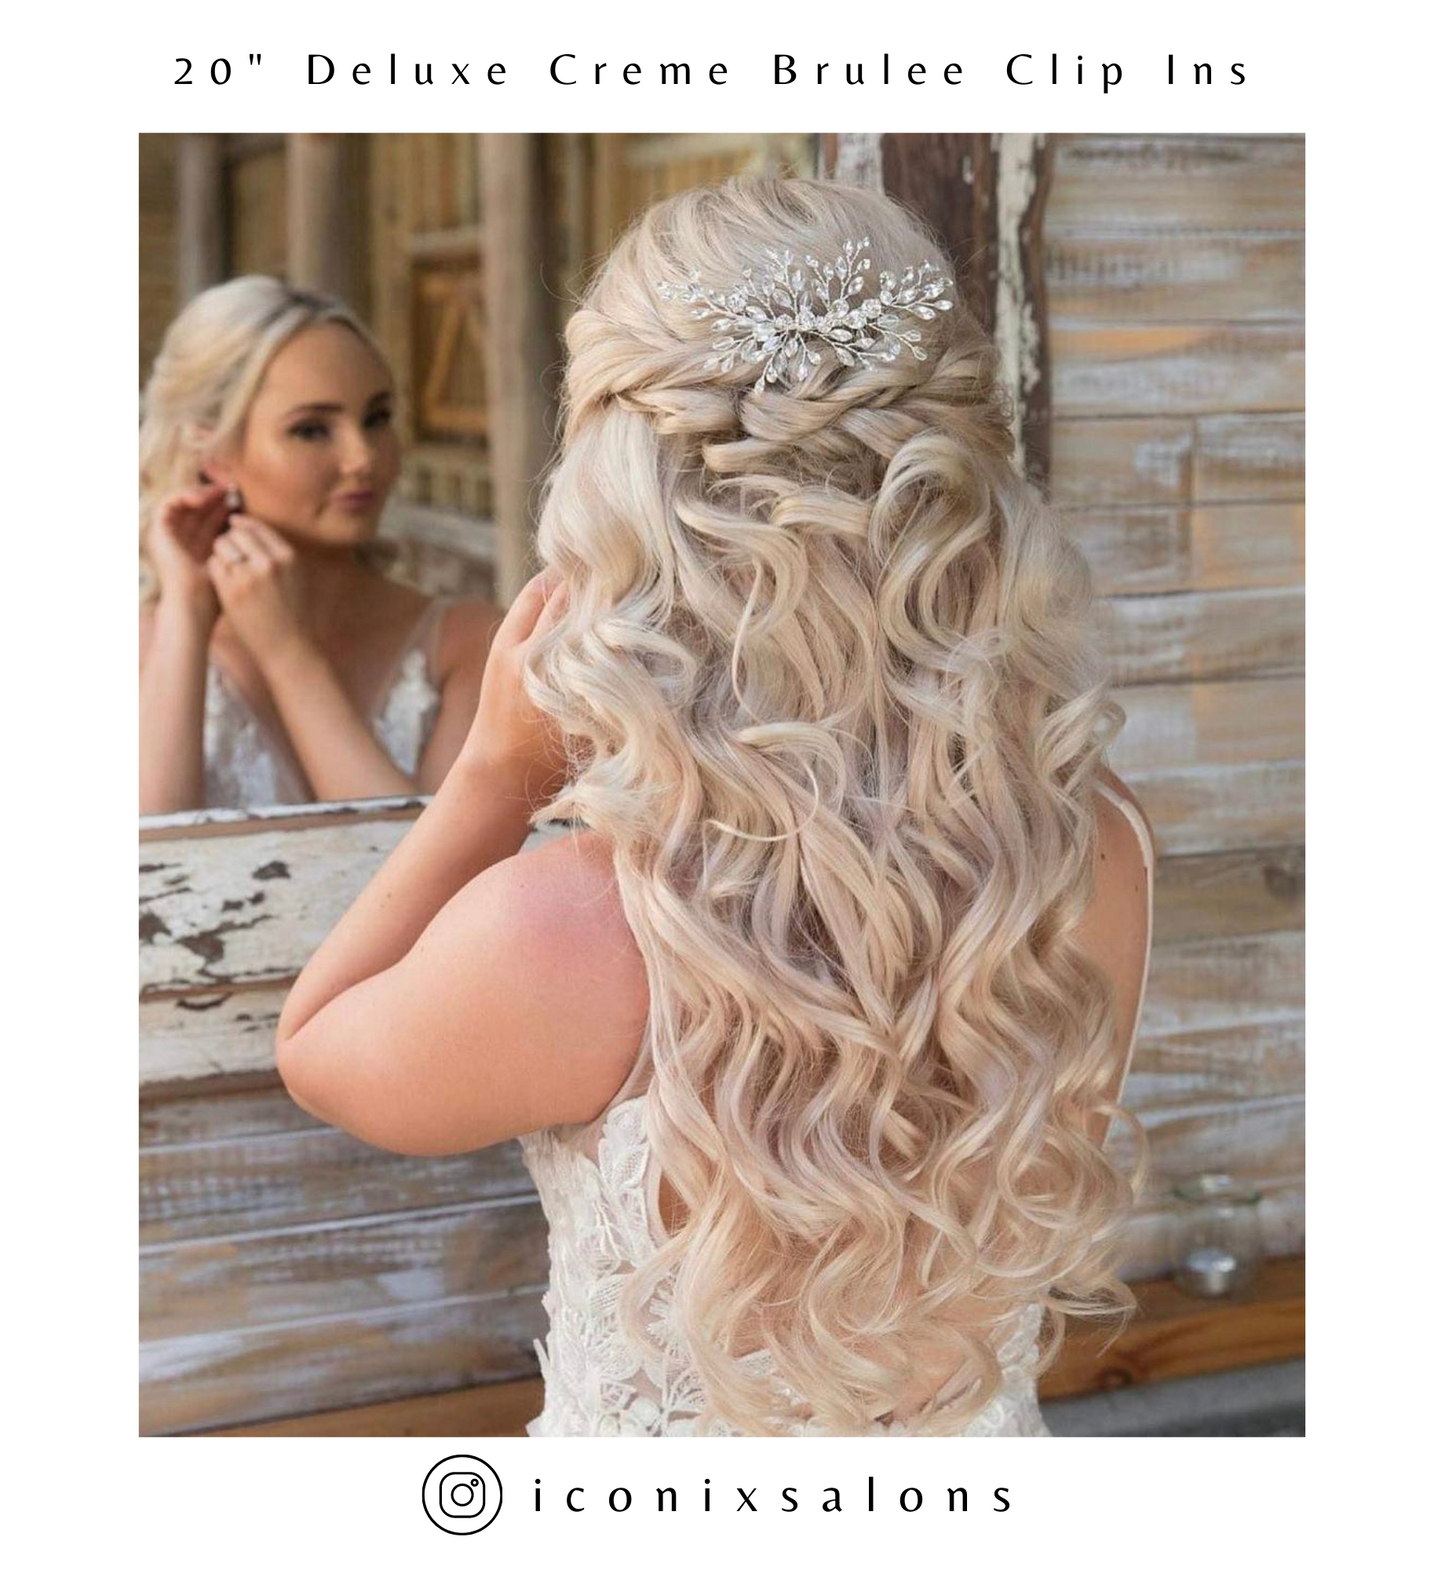 Creme Brulee Blonde #22 Clip On Ponytail Hair Extensions